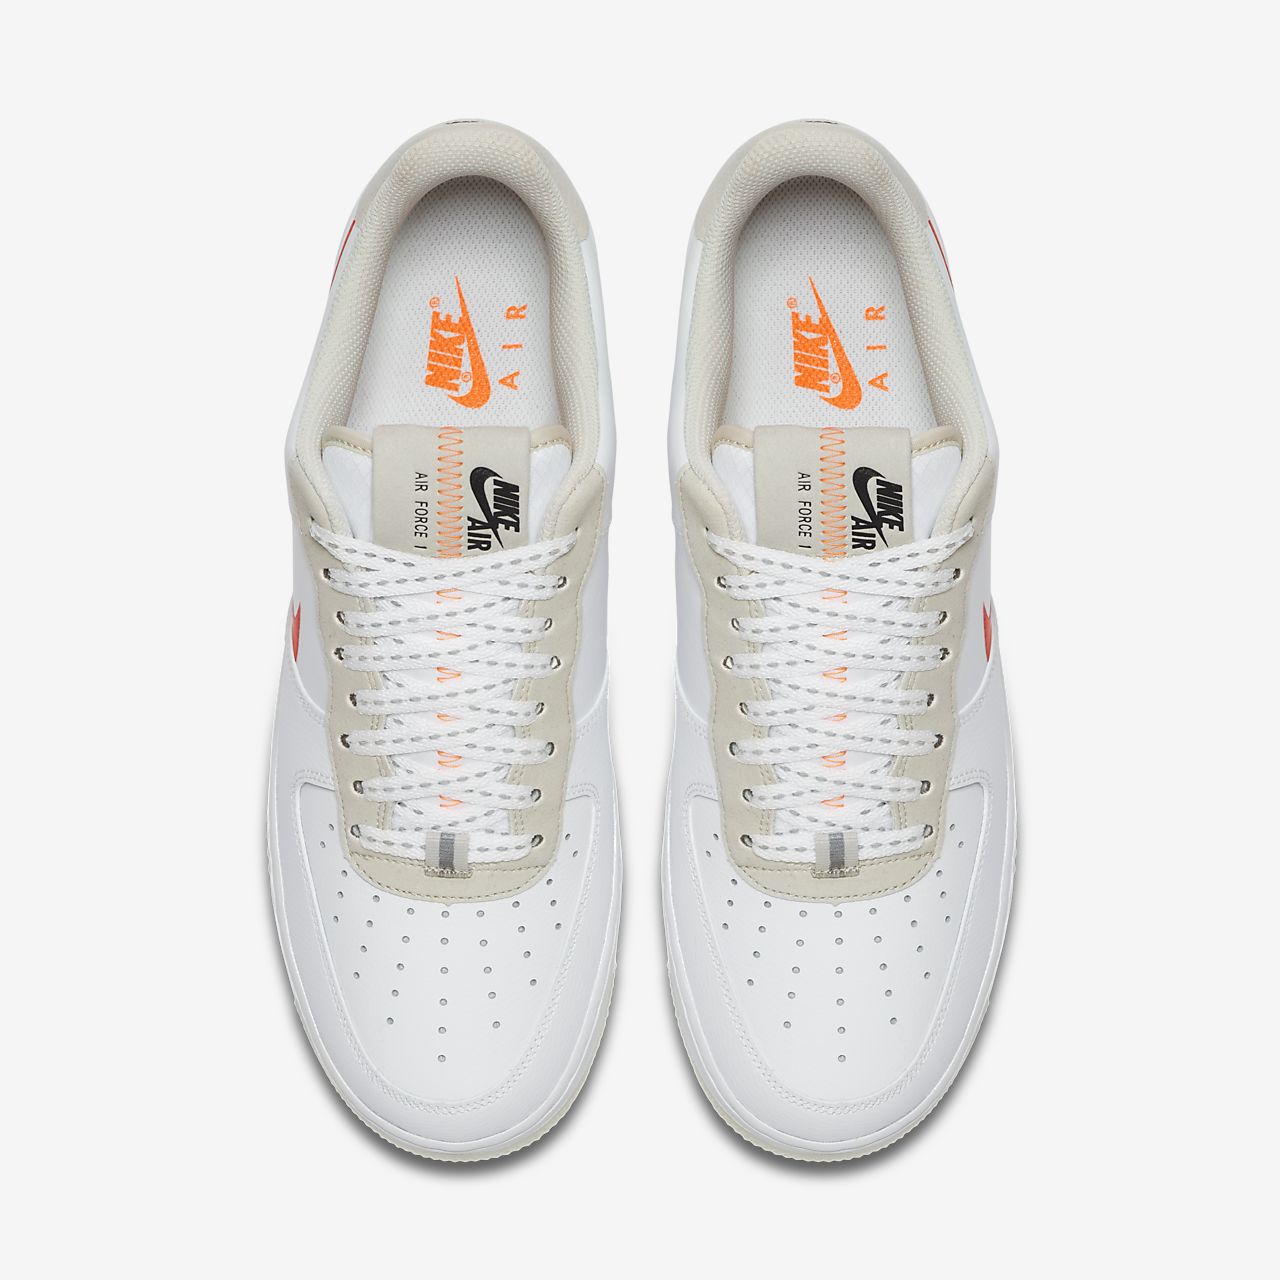 NIKE Official]Nike Air Force 1 '07 LV8 